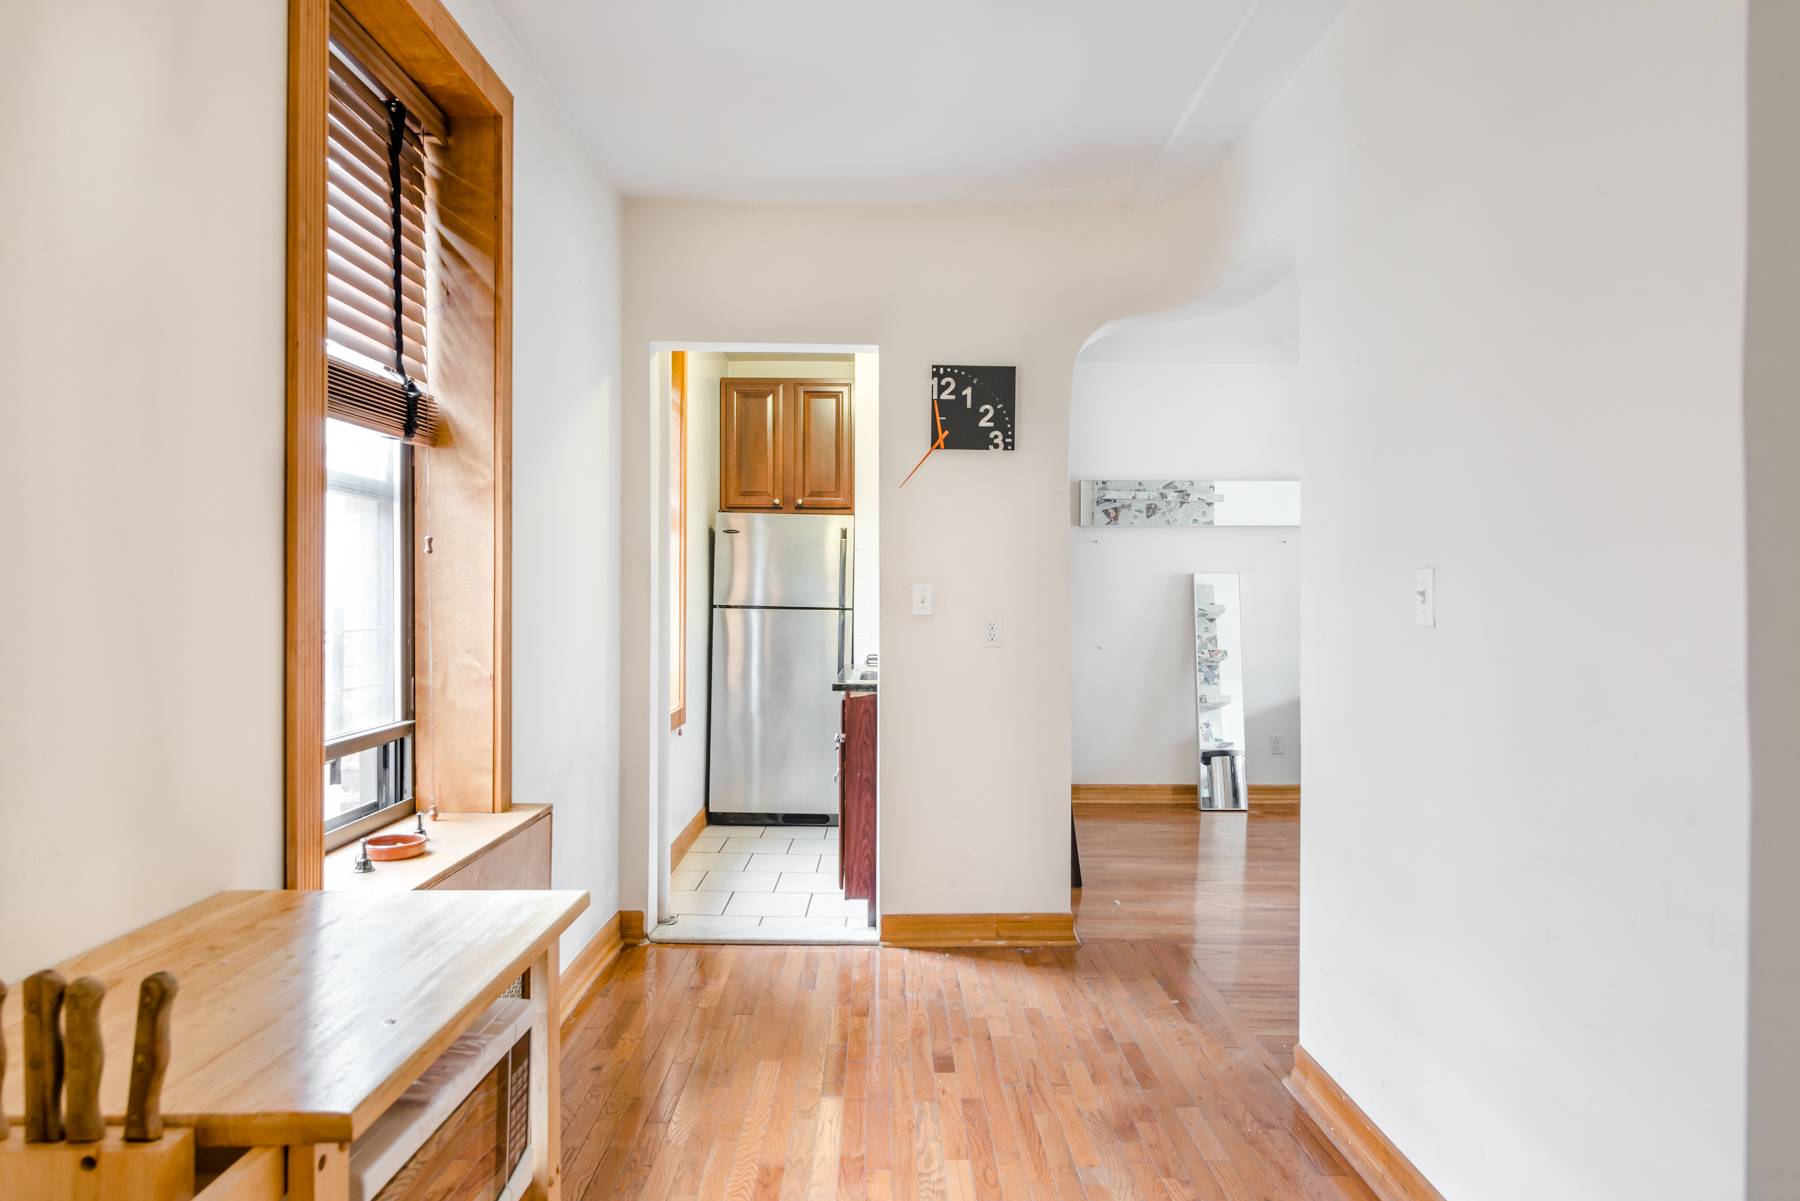 Located in the Heart of Chelsea - Tons of Closets - Sunlit Separate Kitchen - Elevator/Laundry Building